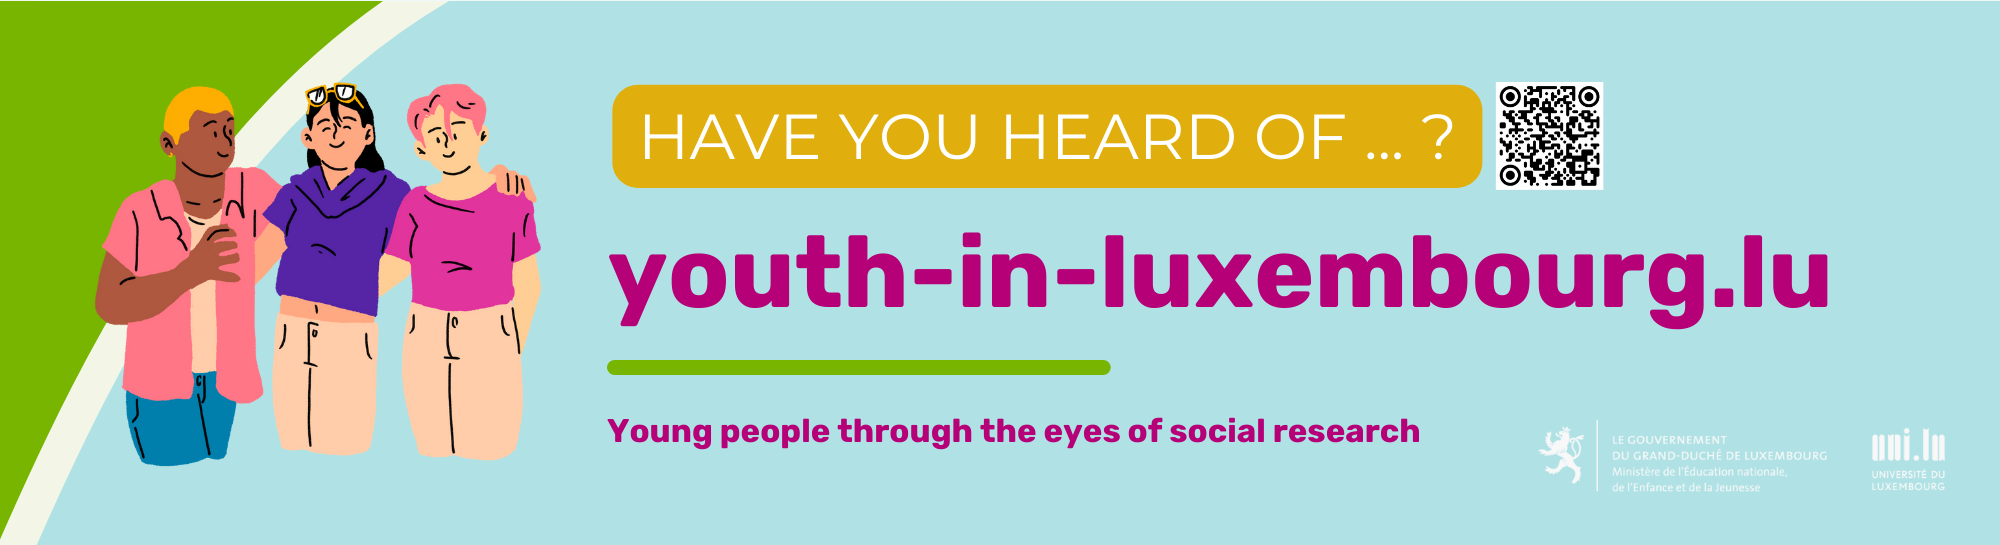 Challenges of the youth: Have you heard of "youth-in-luxembourg.lu"?